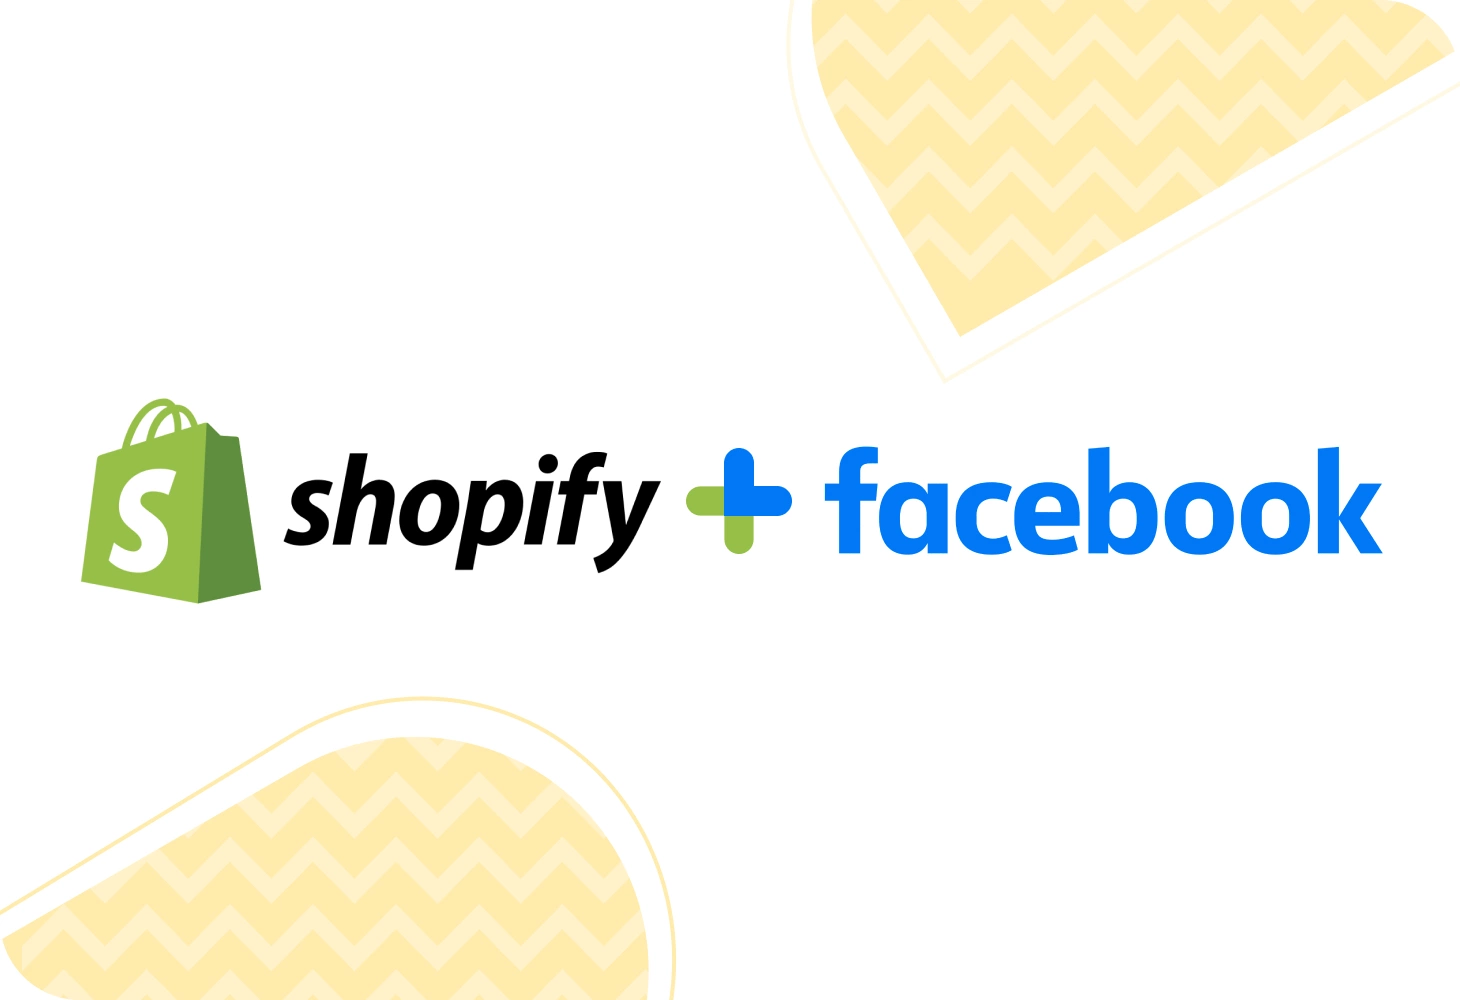 Shopify and Facebook partnership